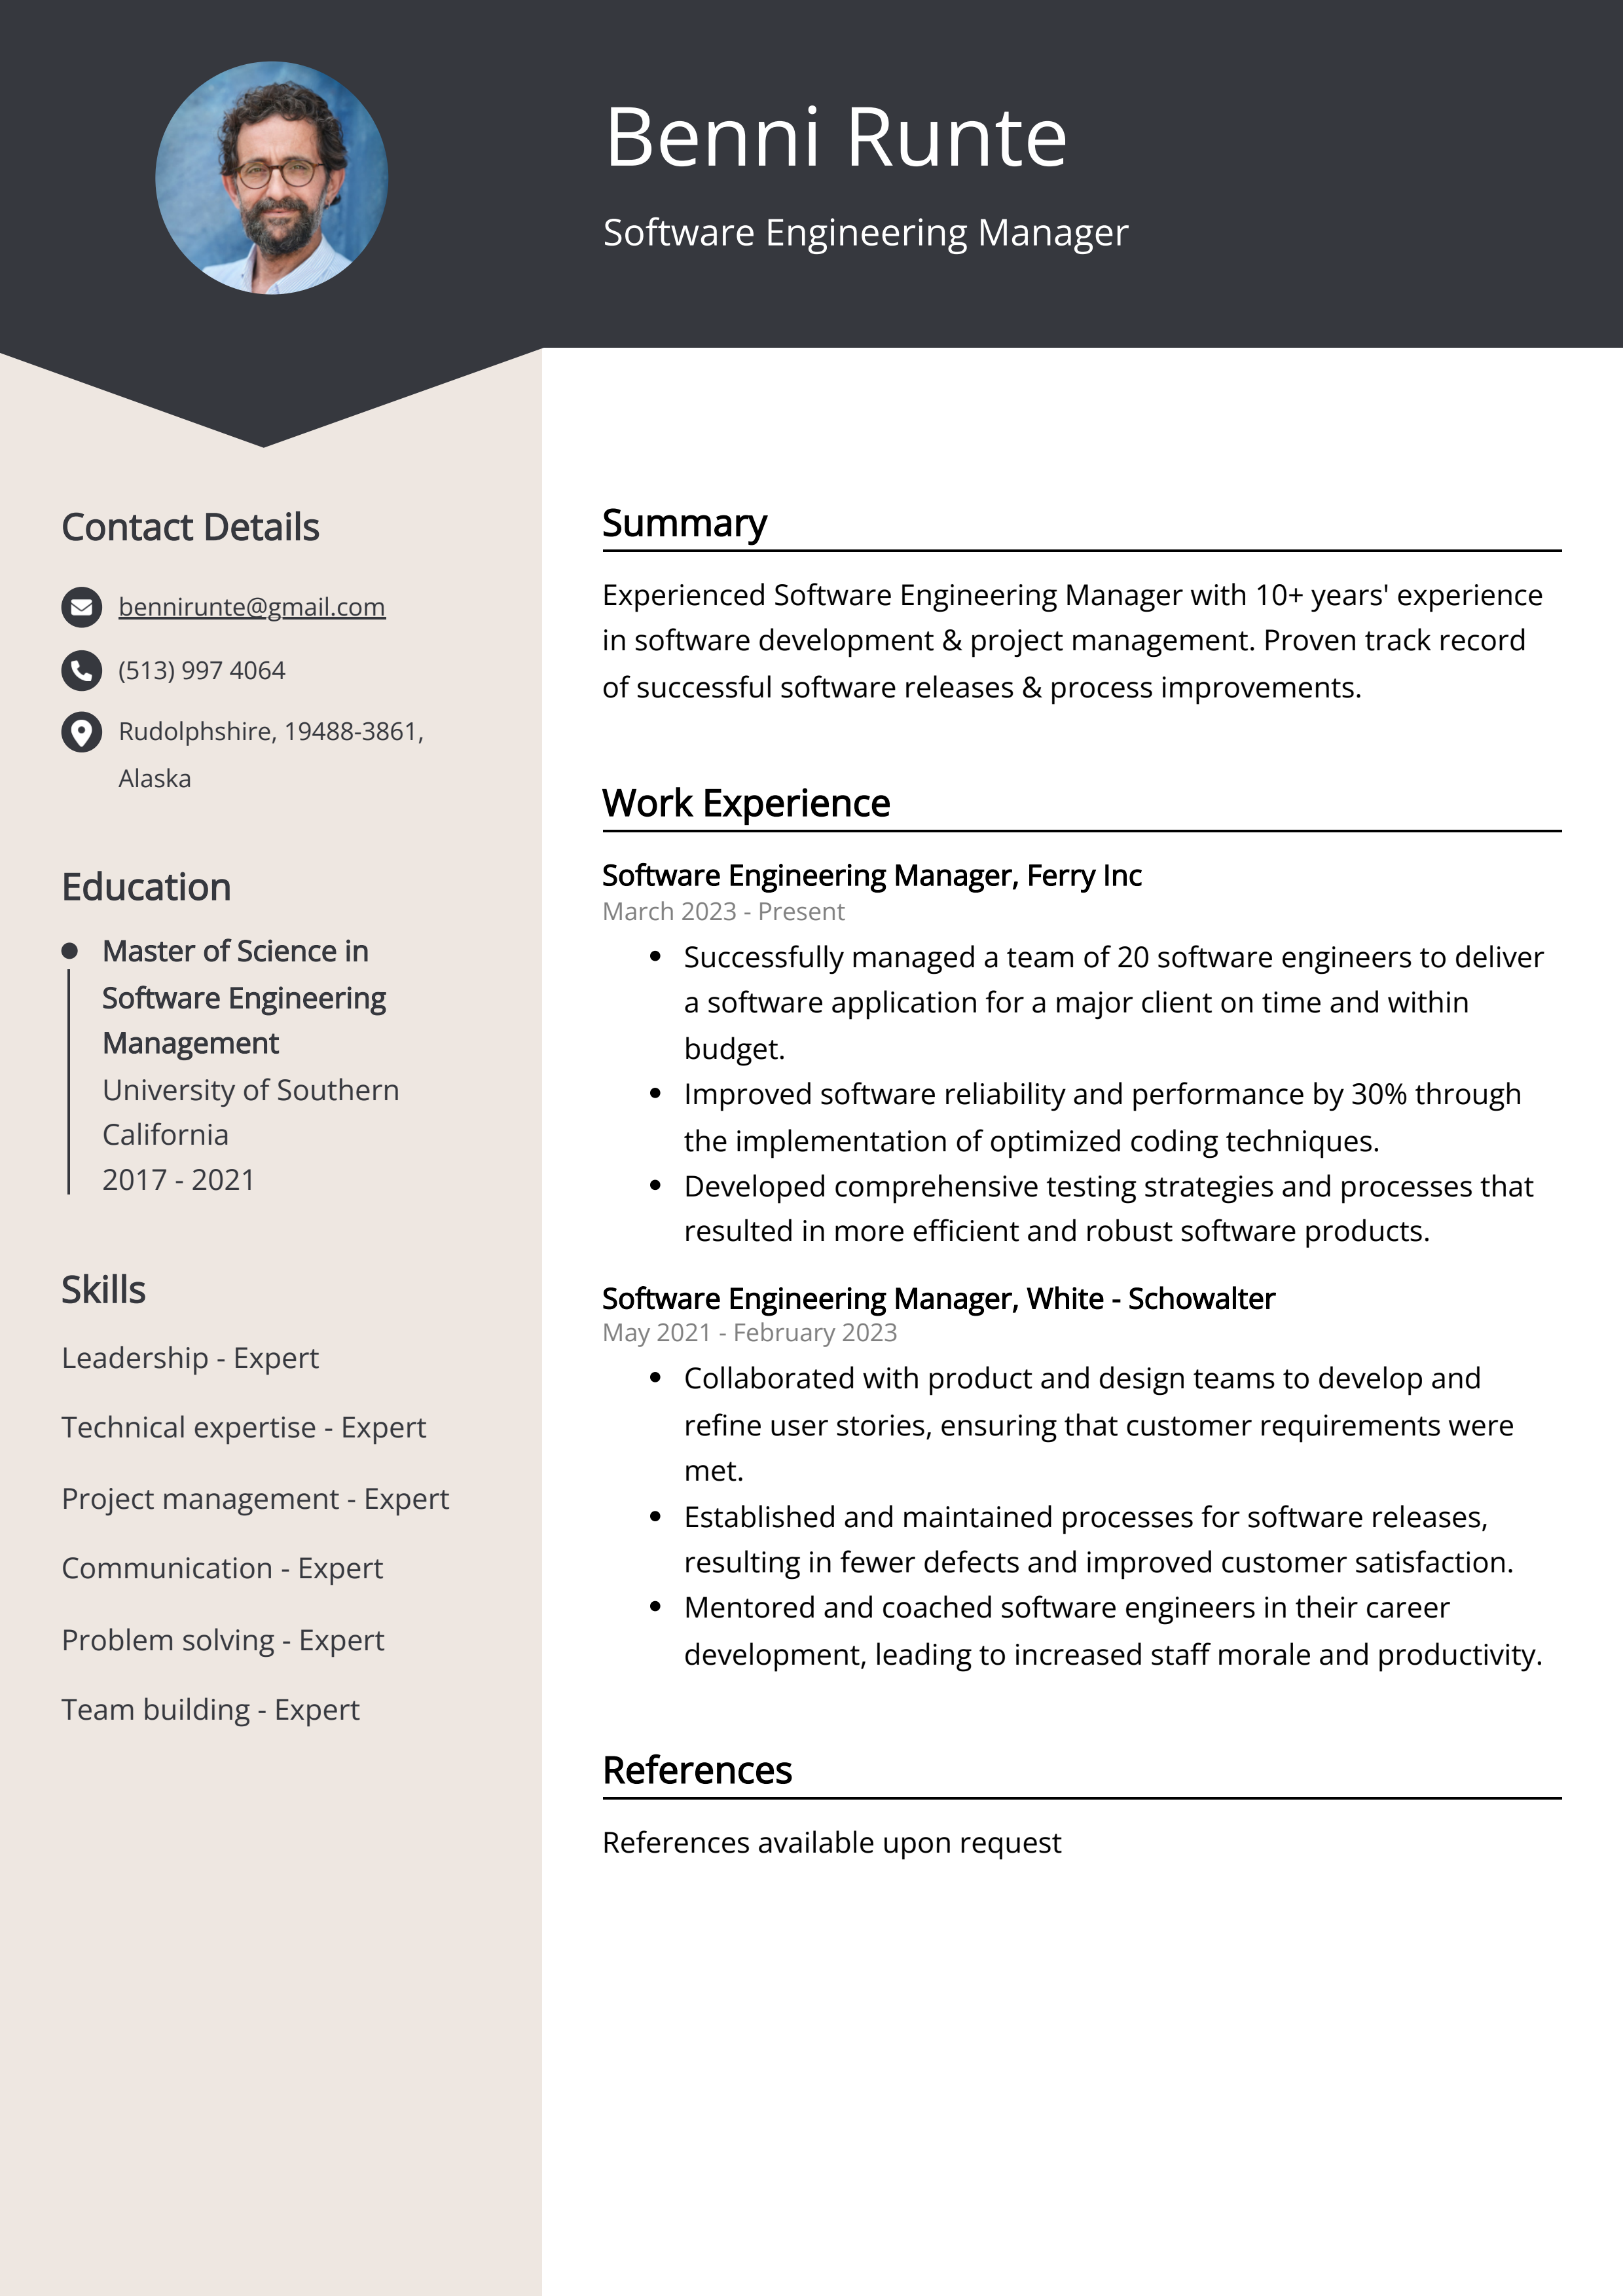 Software Engineering Manager CV Example